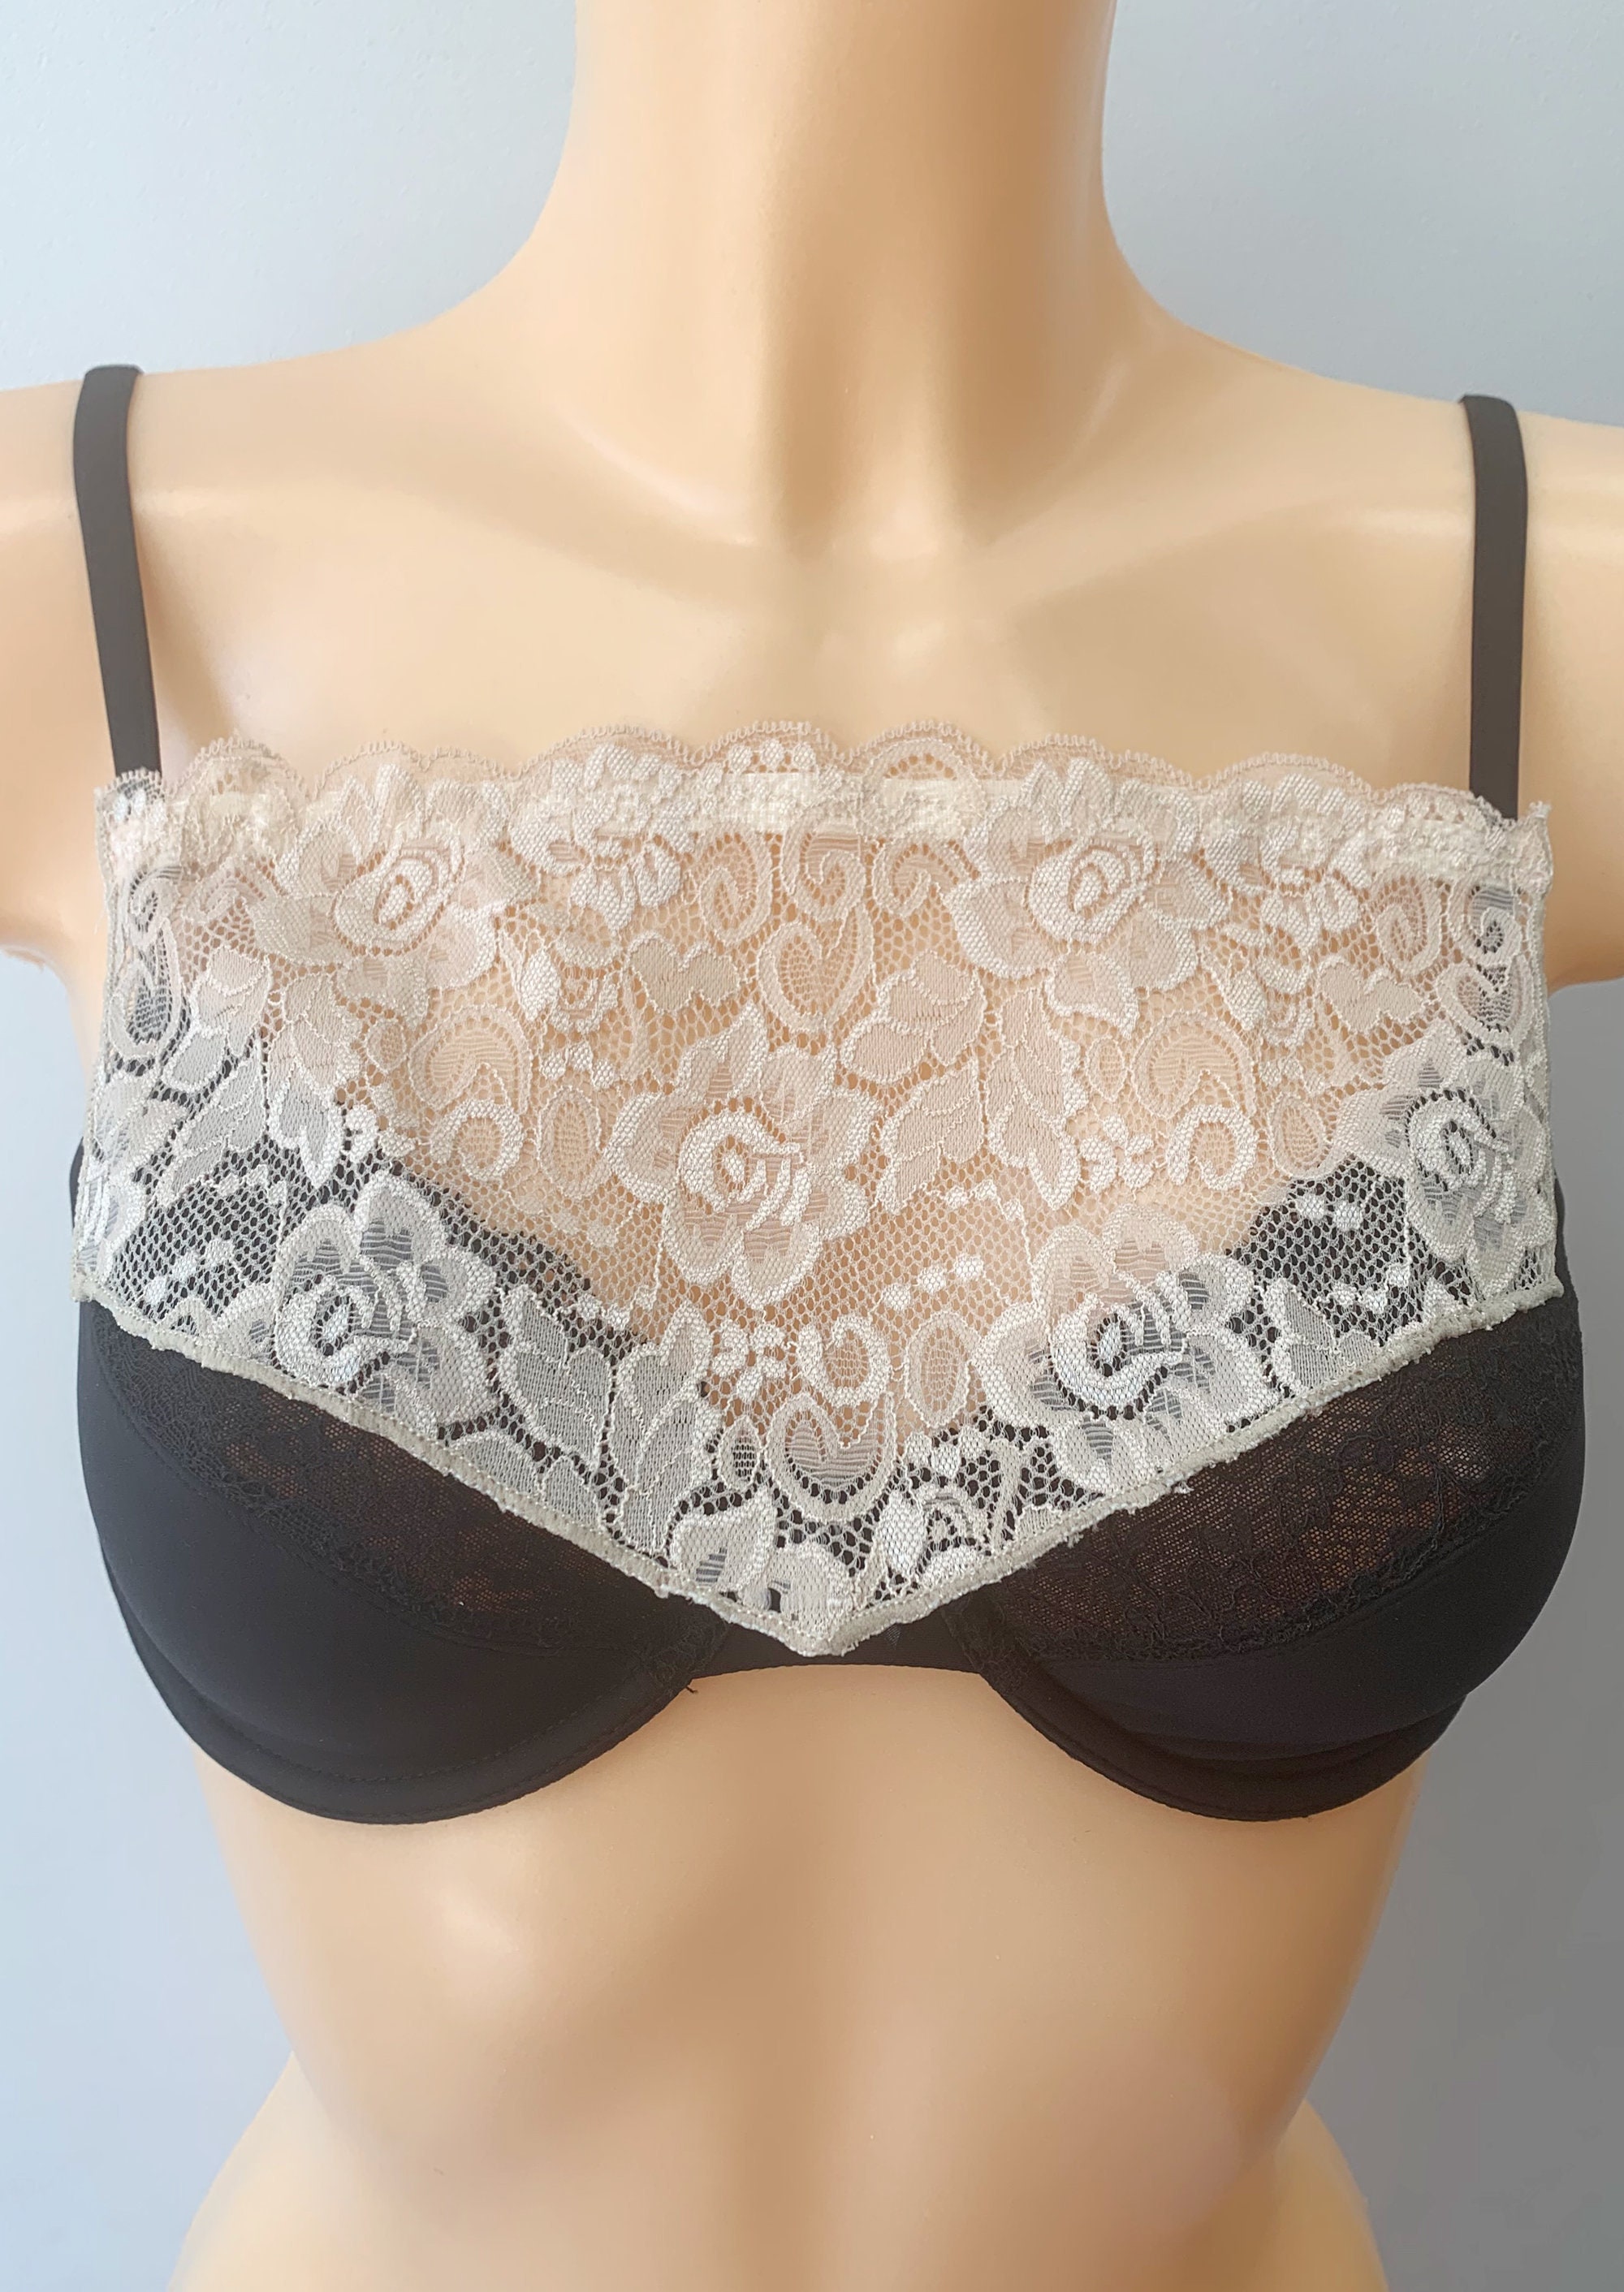 Modesty Panel Lace Bra Insert Instant Camisole Cleavage Cover